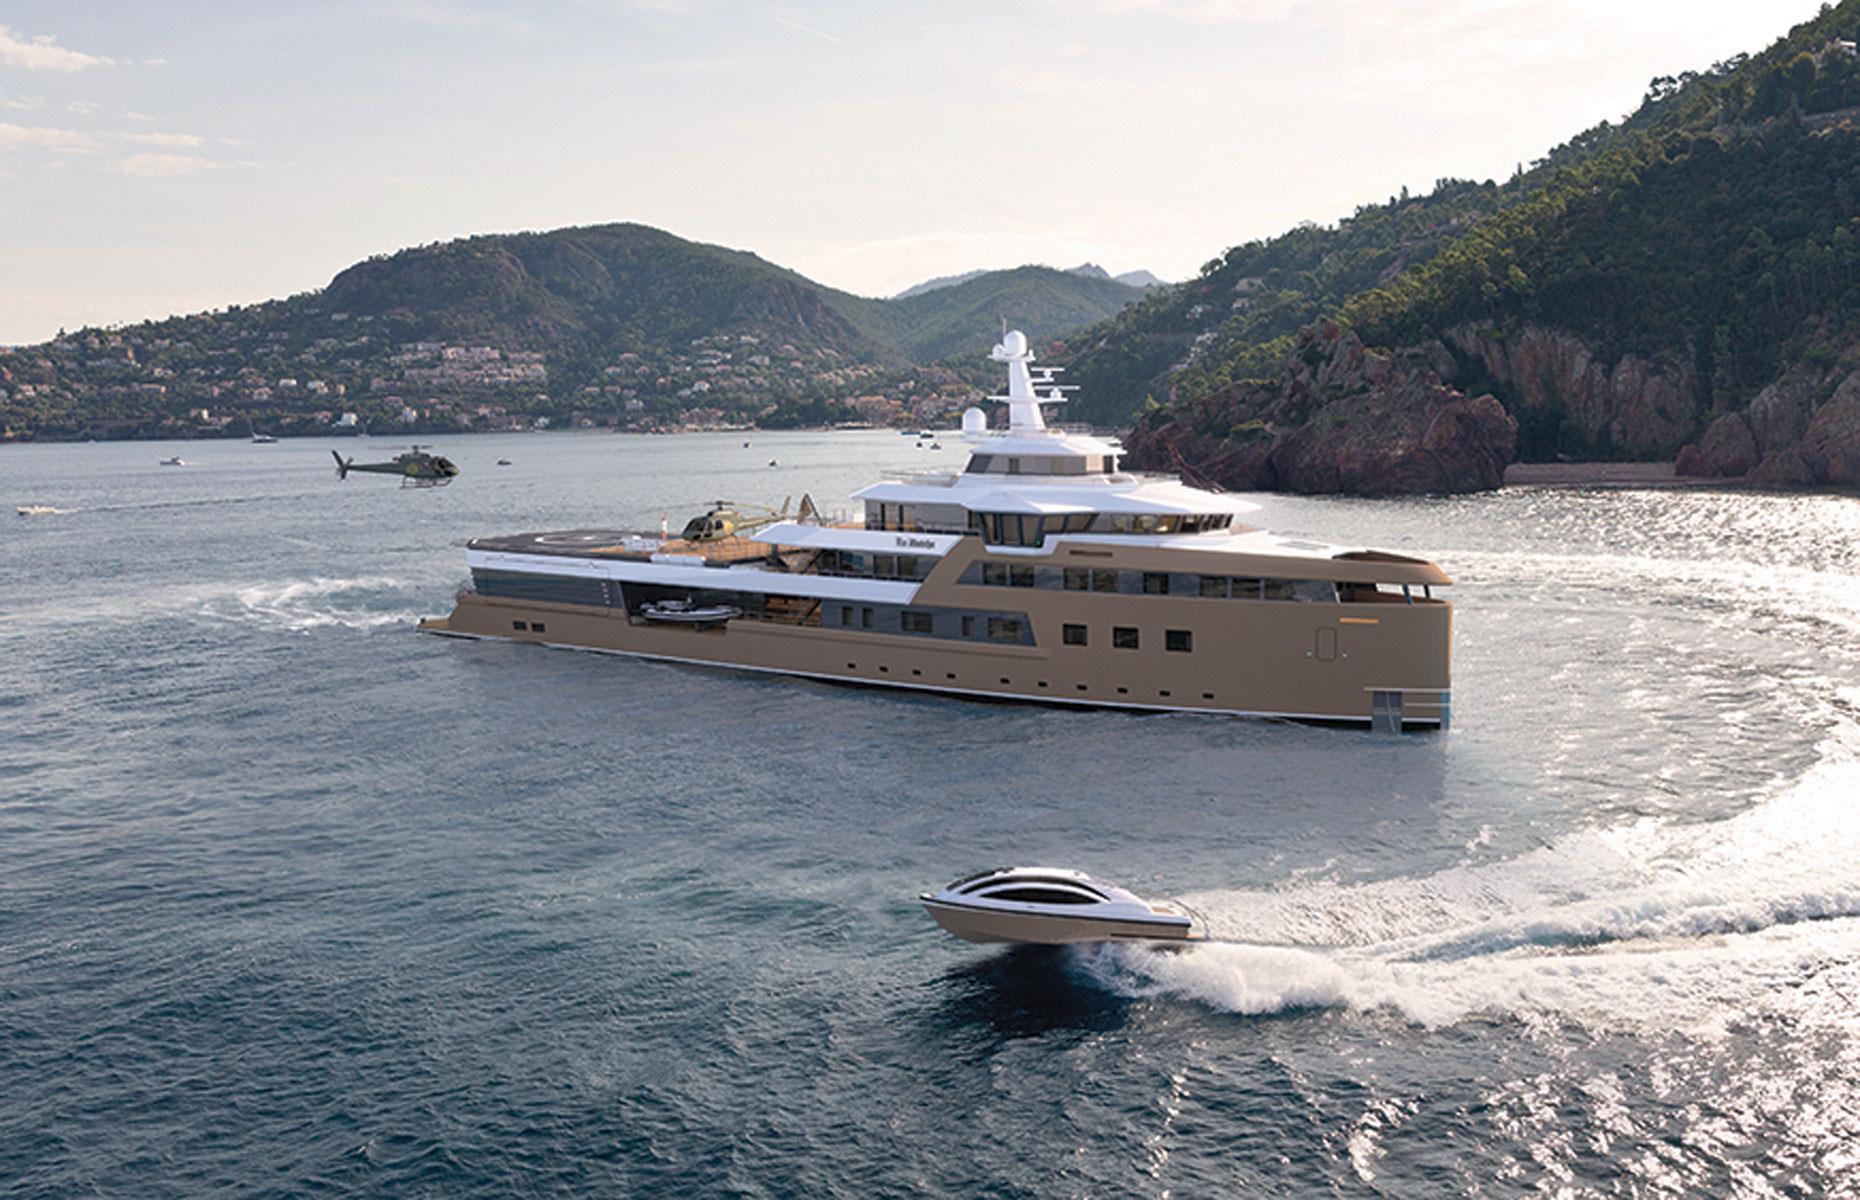 The most impressive yachts today